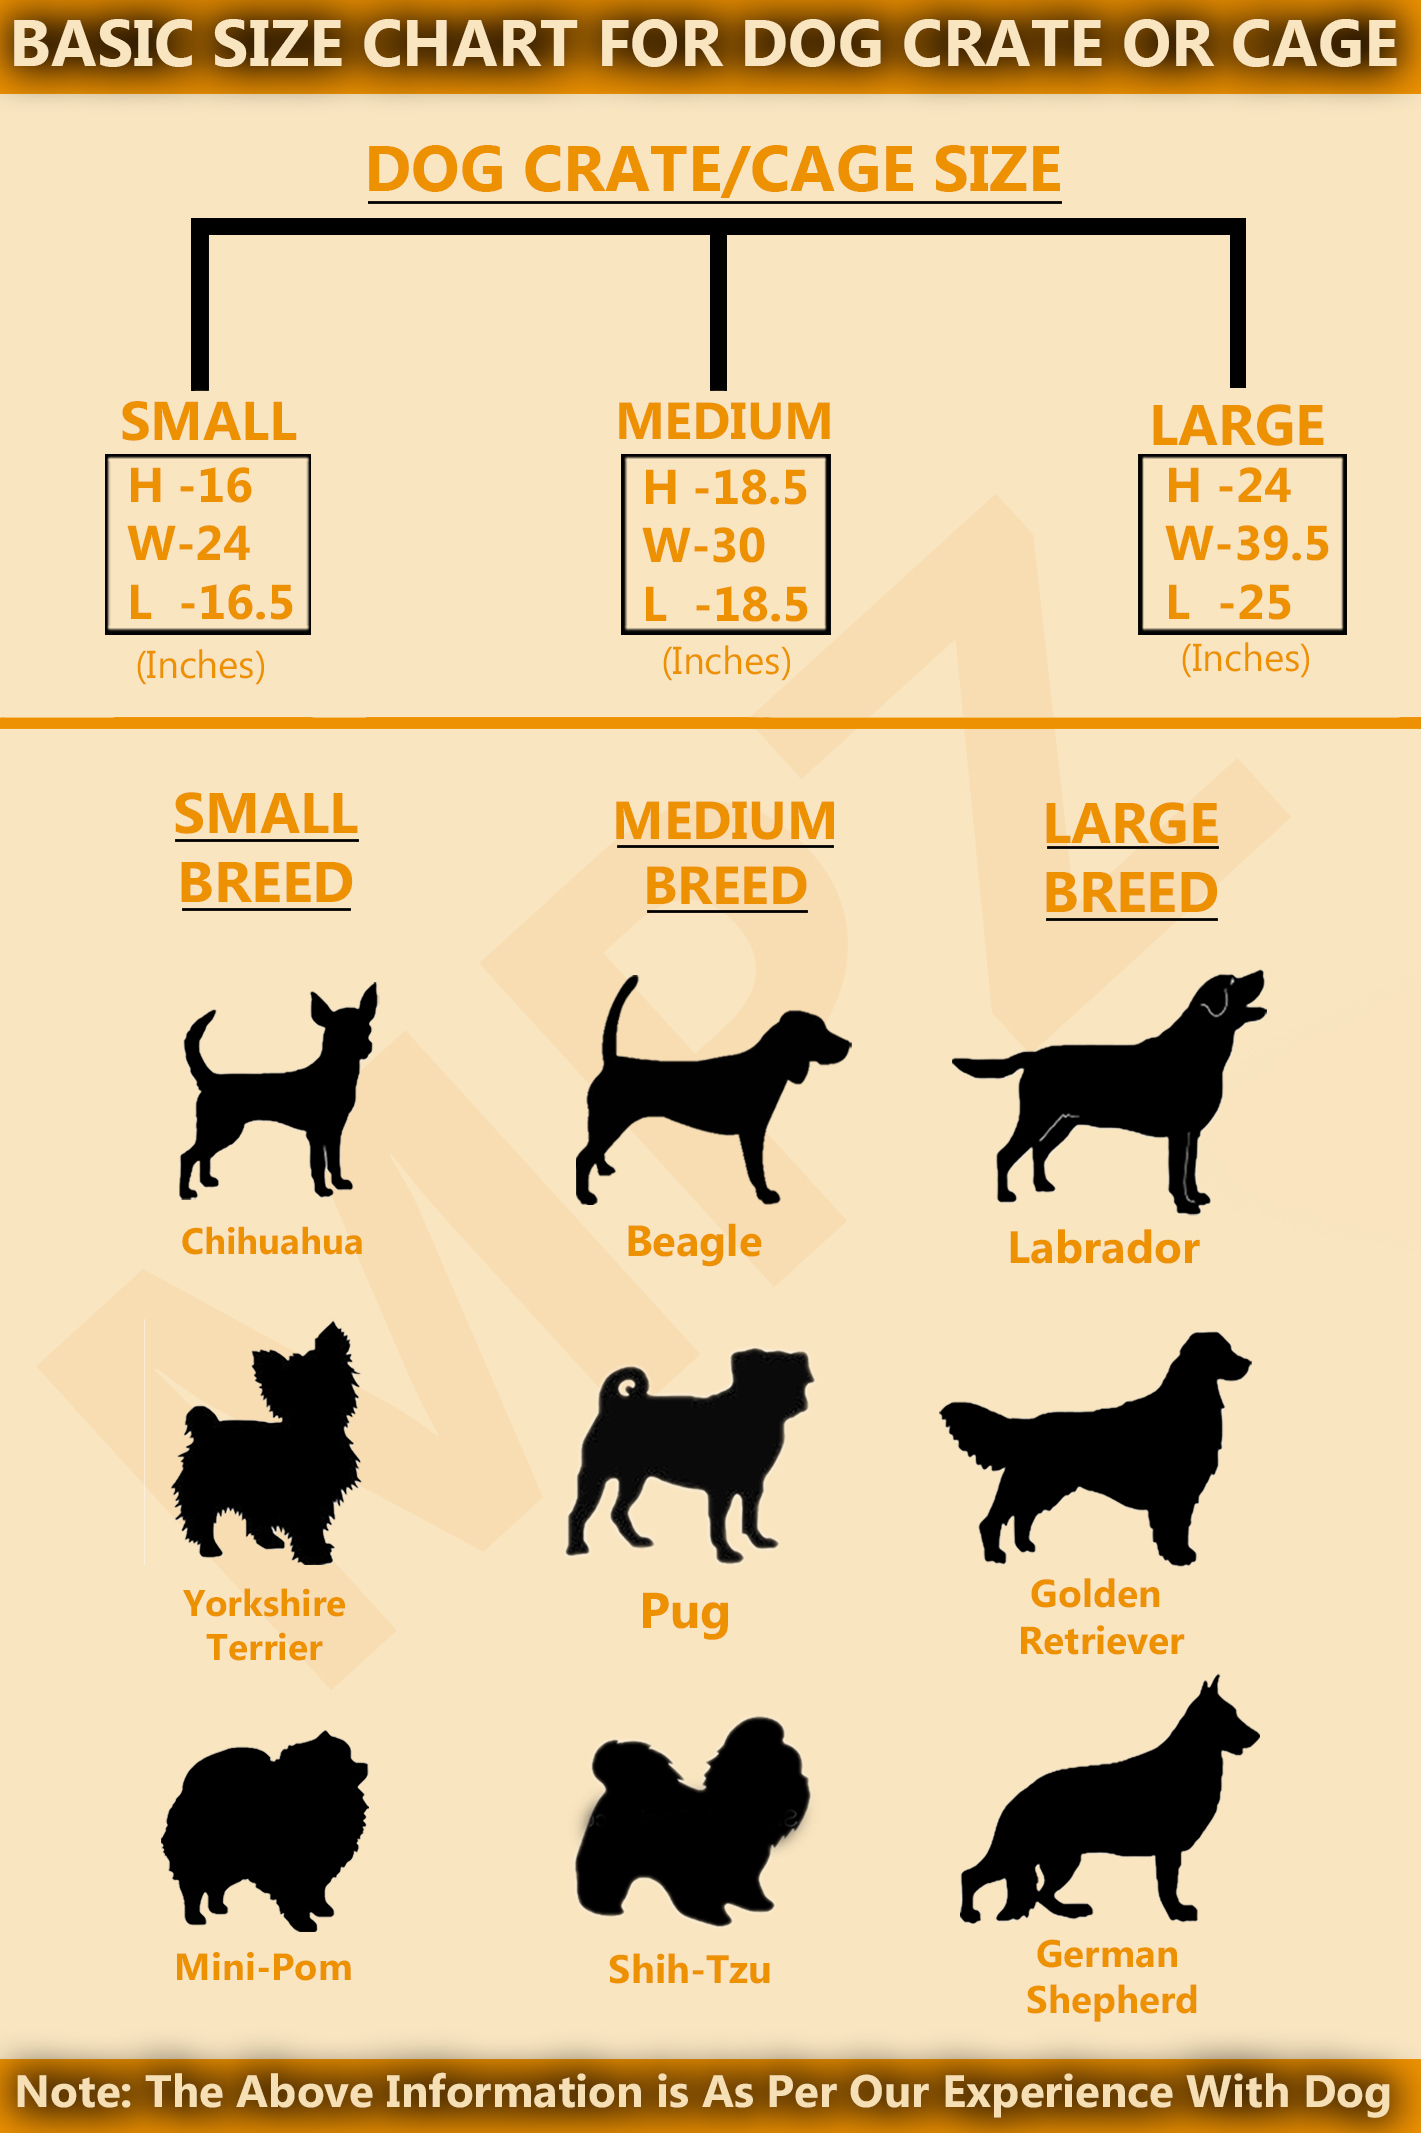 Basic size chart for dog crate or cage